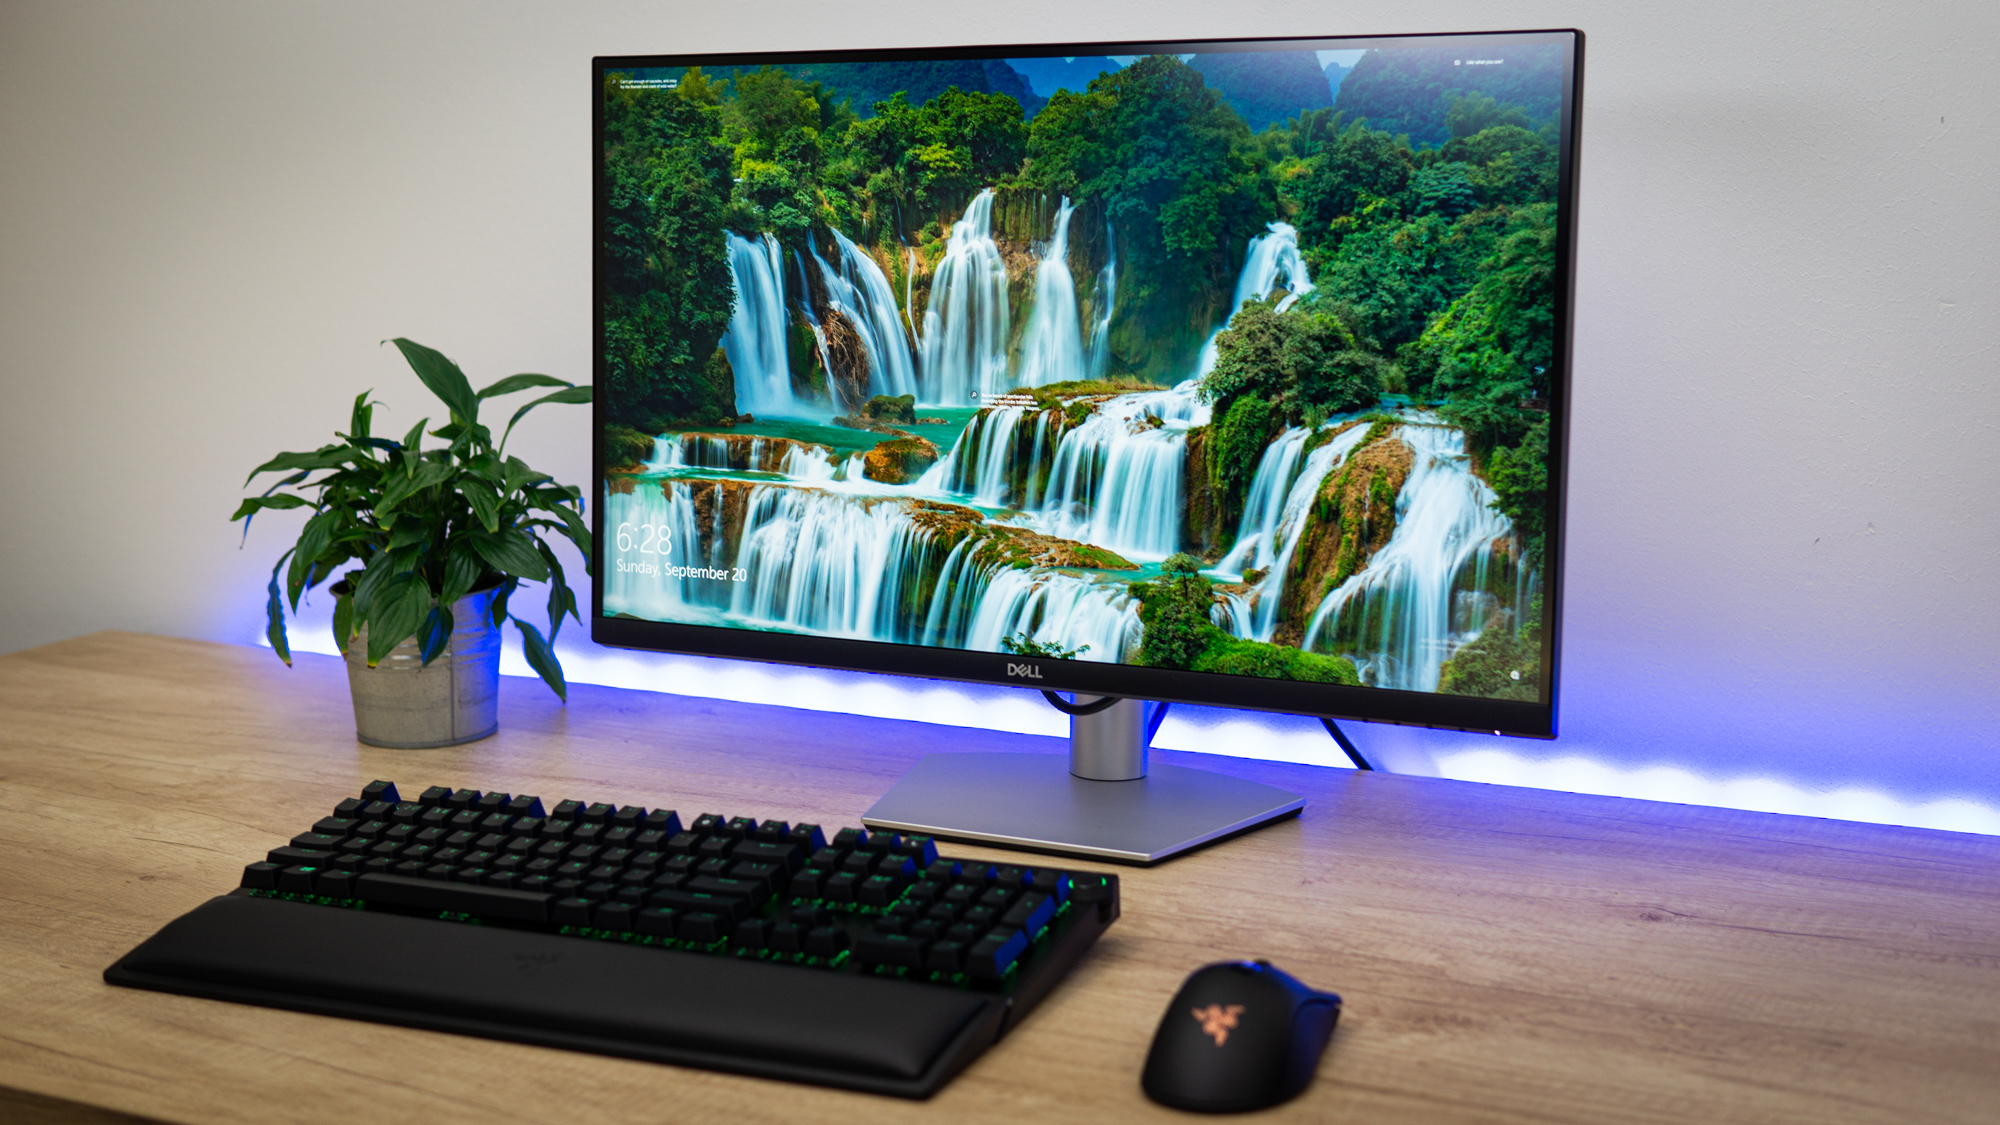 Dell S2721QS Review: 4K Basics At A Great Price